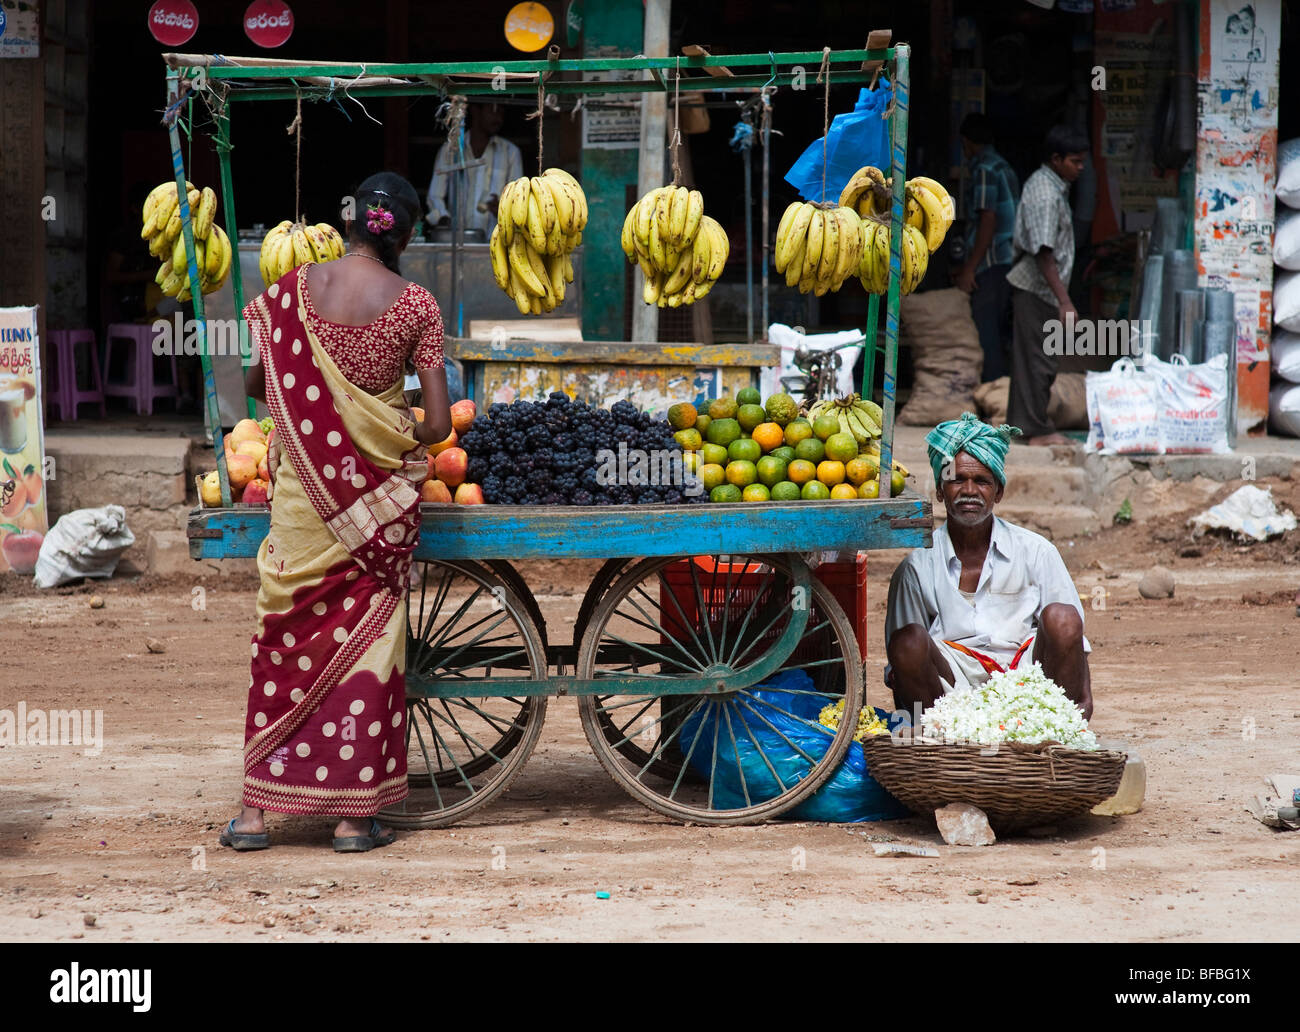 Indian wman selling fruit from a cart in an indian street. Andhra Pradesh, India Stock Photo